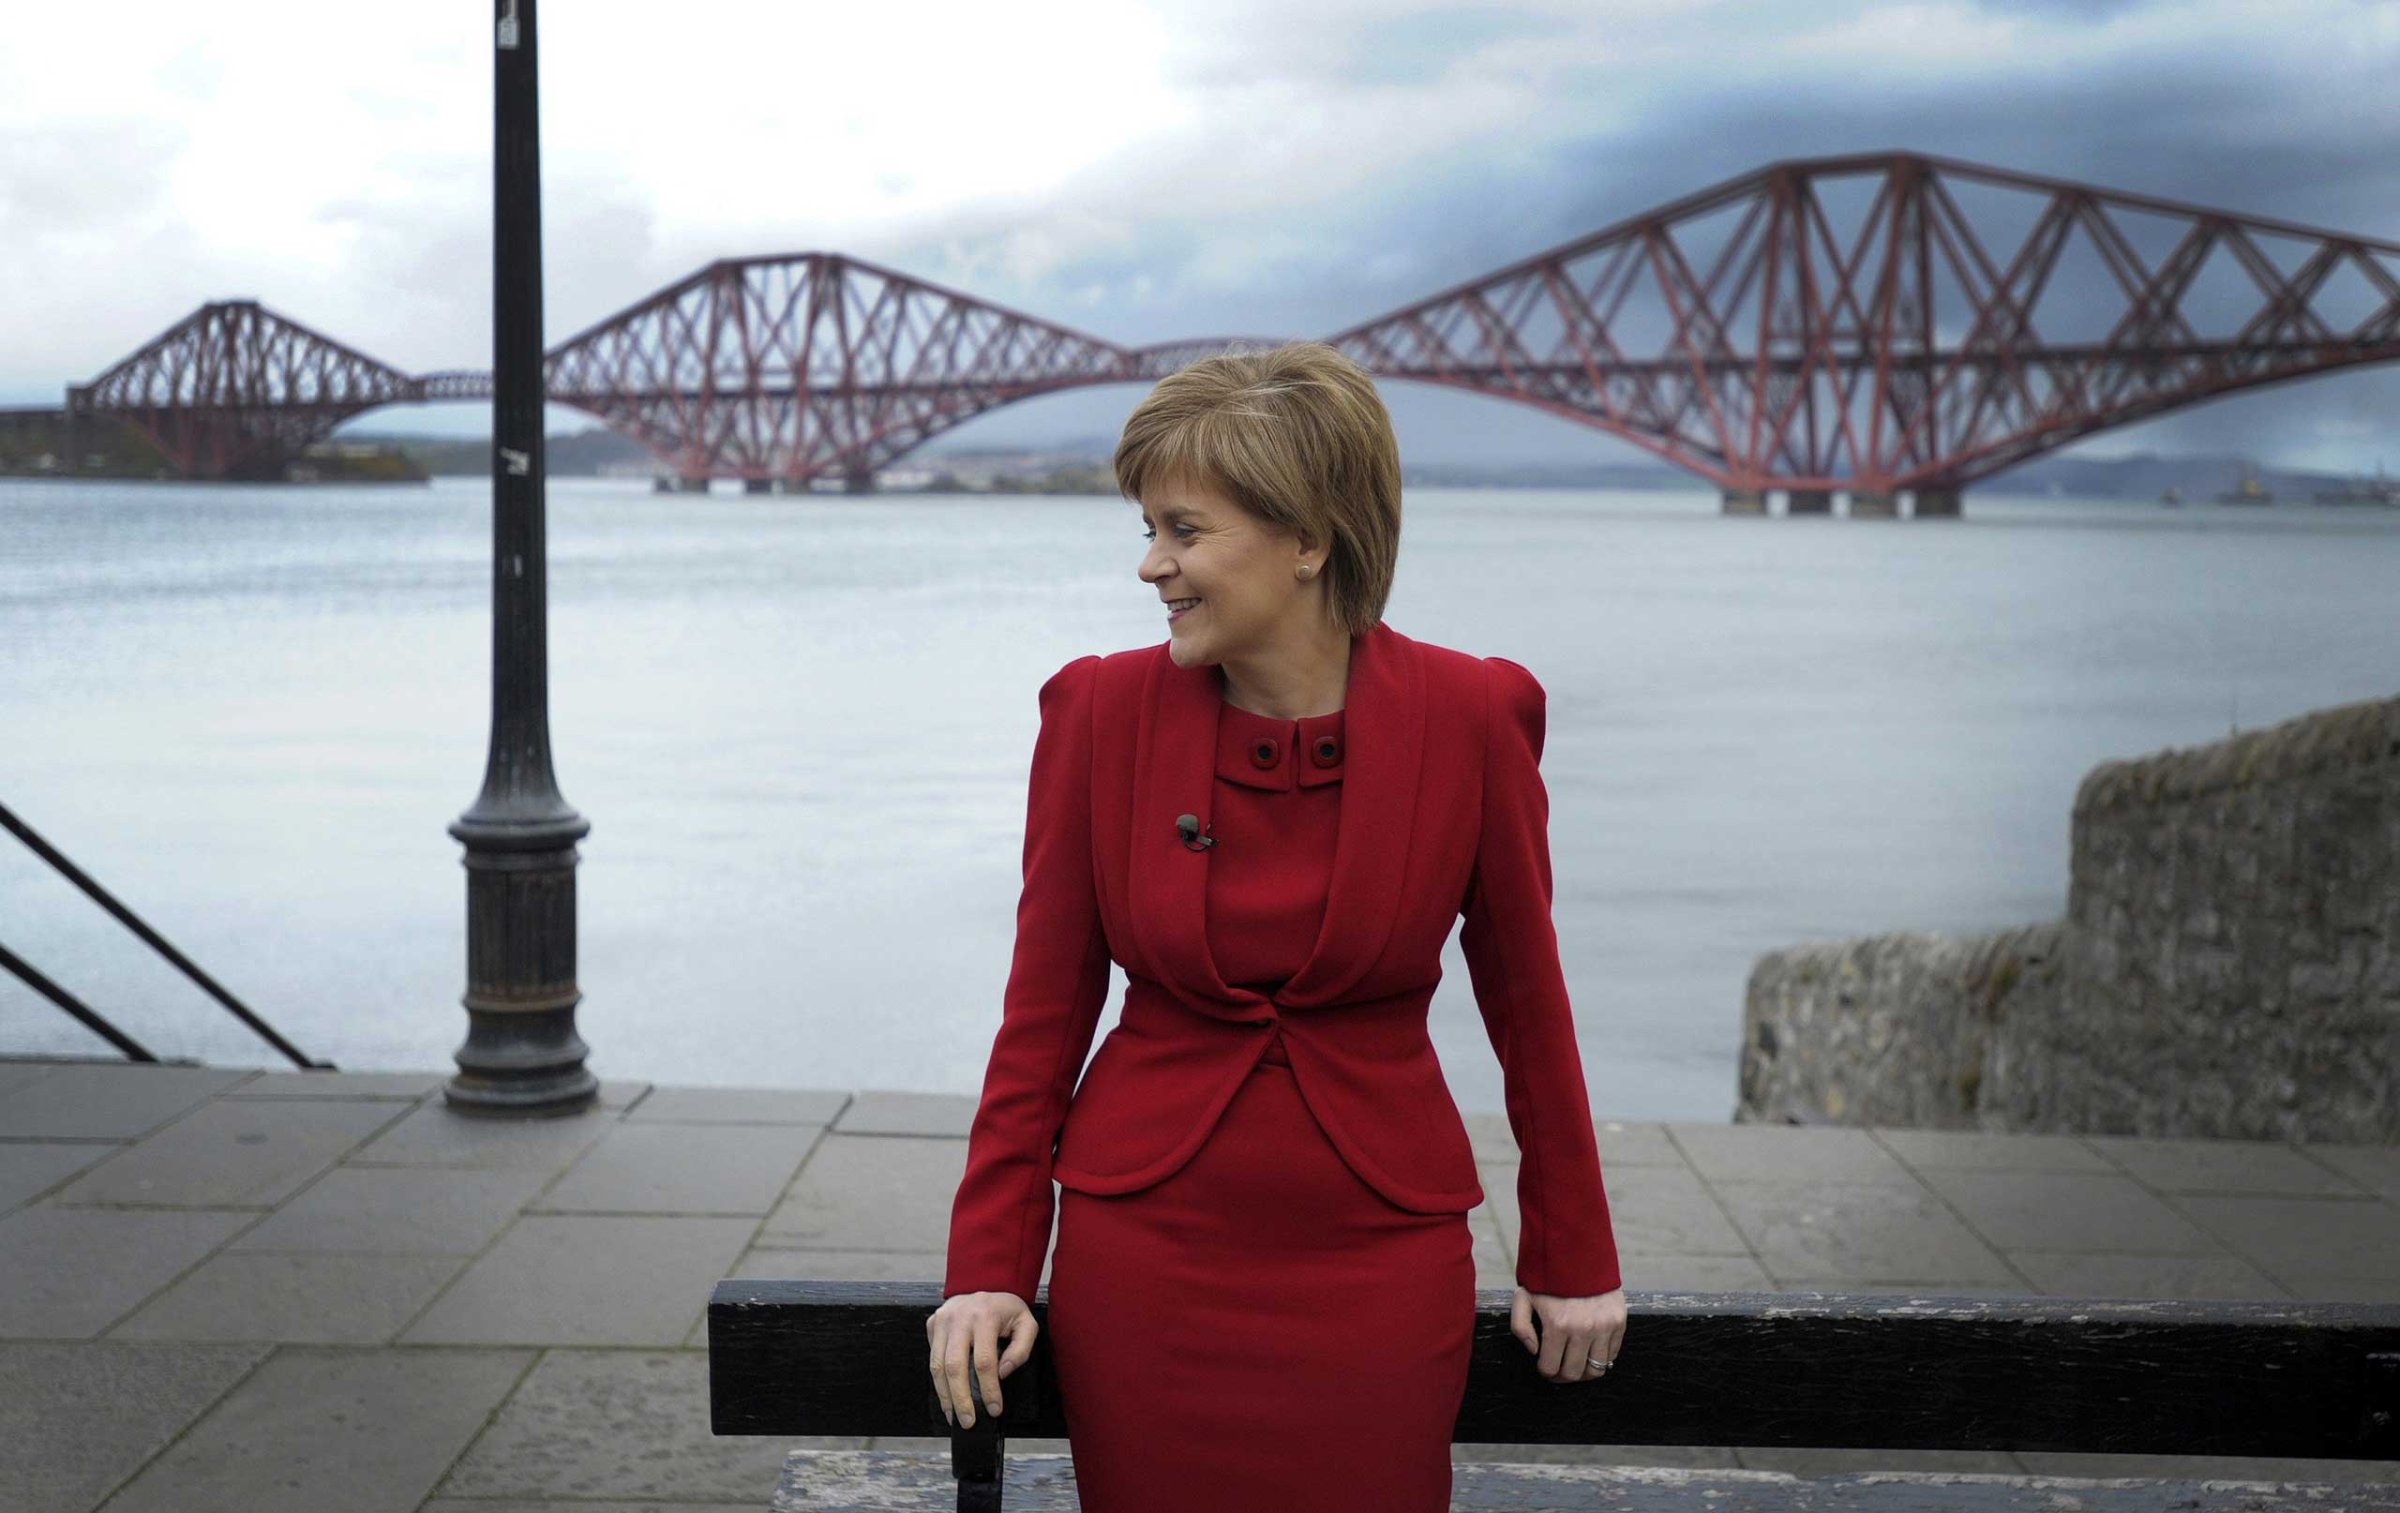 First Minister of Scotland and leader of the Scottish National Party Nicola Sturgeon campaigns in South Queensferry on the outskirts of Edinburgh on April 28, 2015.